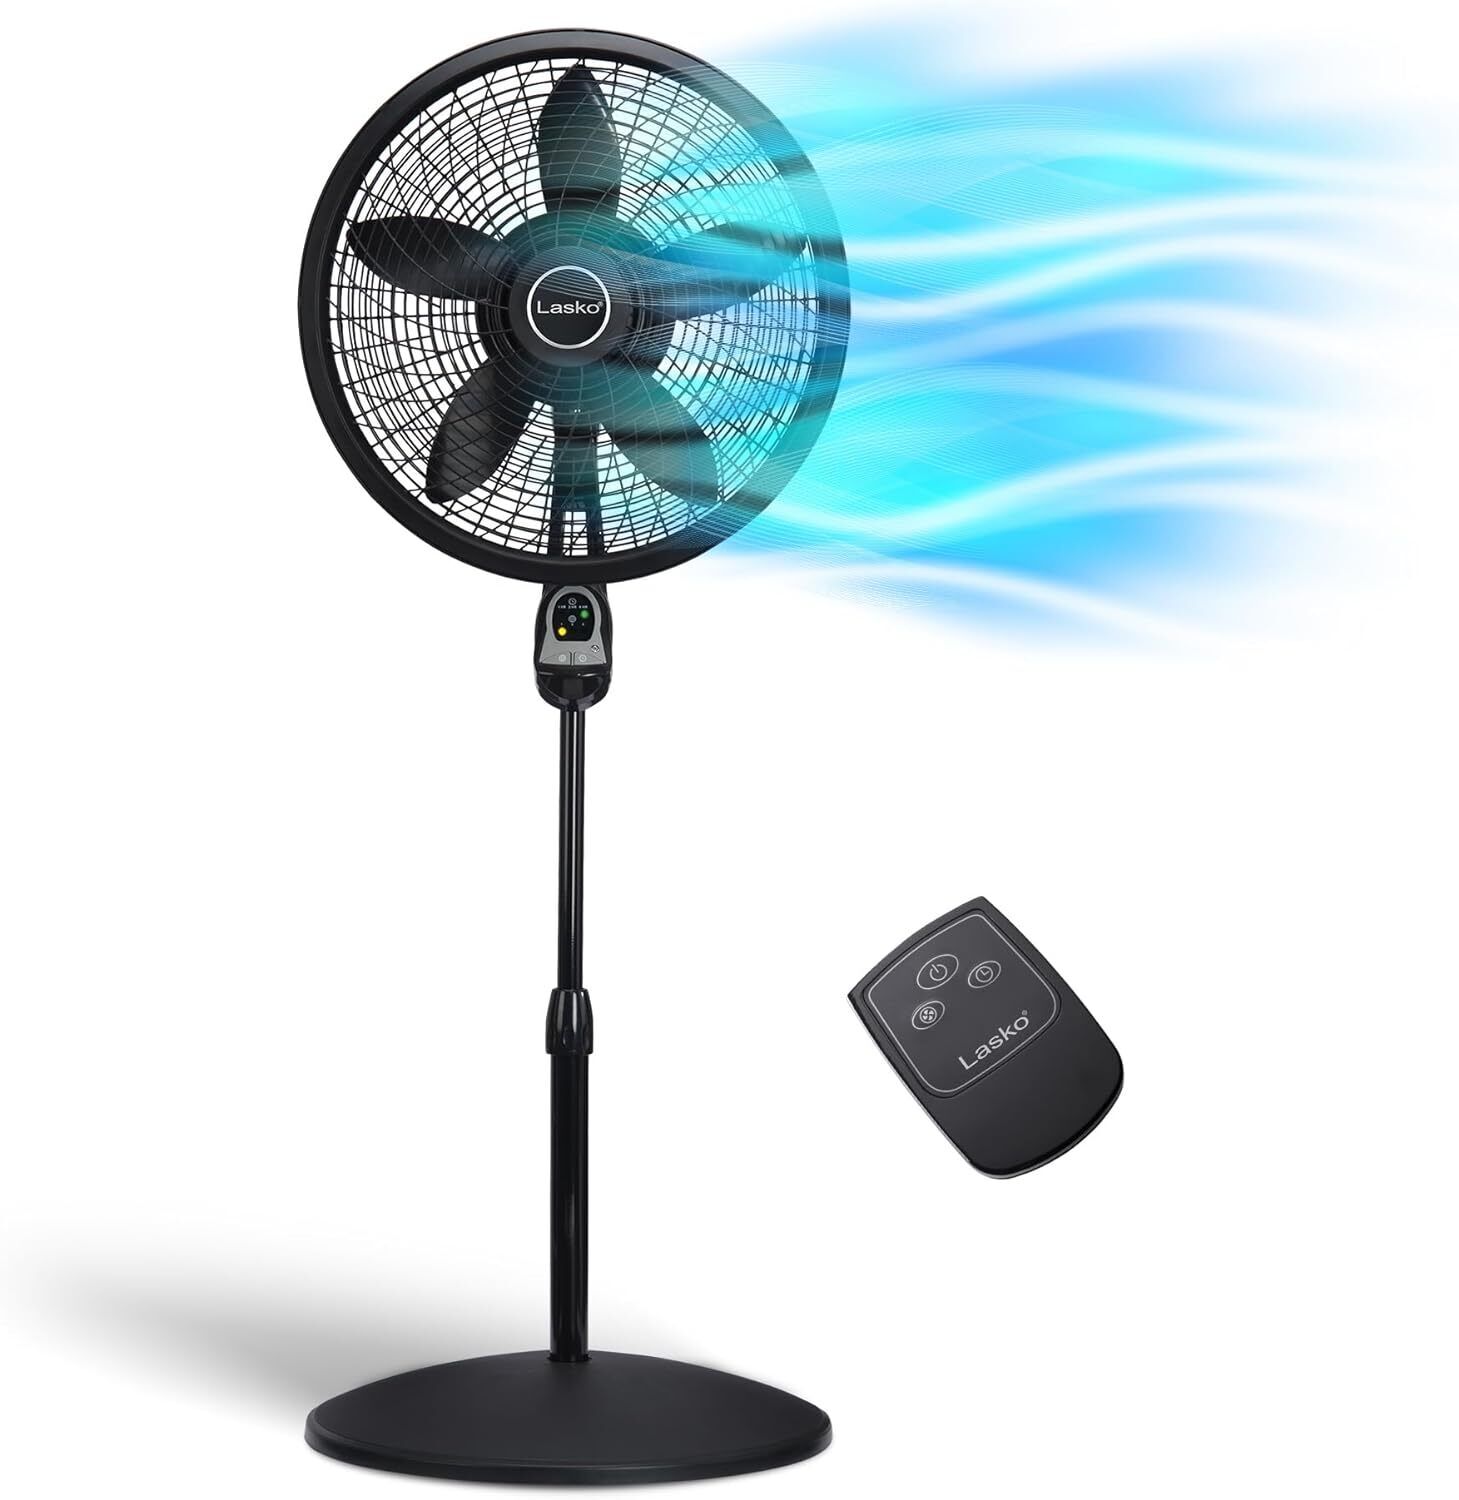 Oscillating Cyclone Pedestal Fan, Adjustable Height, Timer, Remote Control, 3